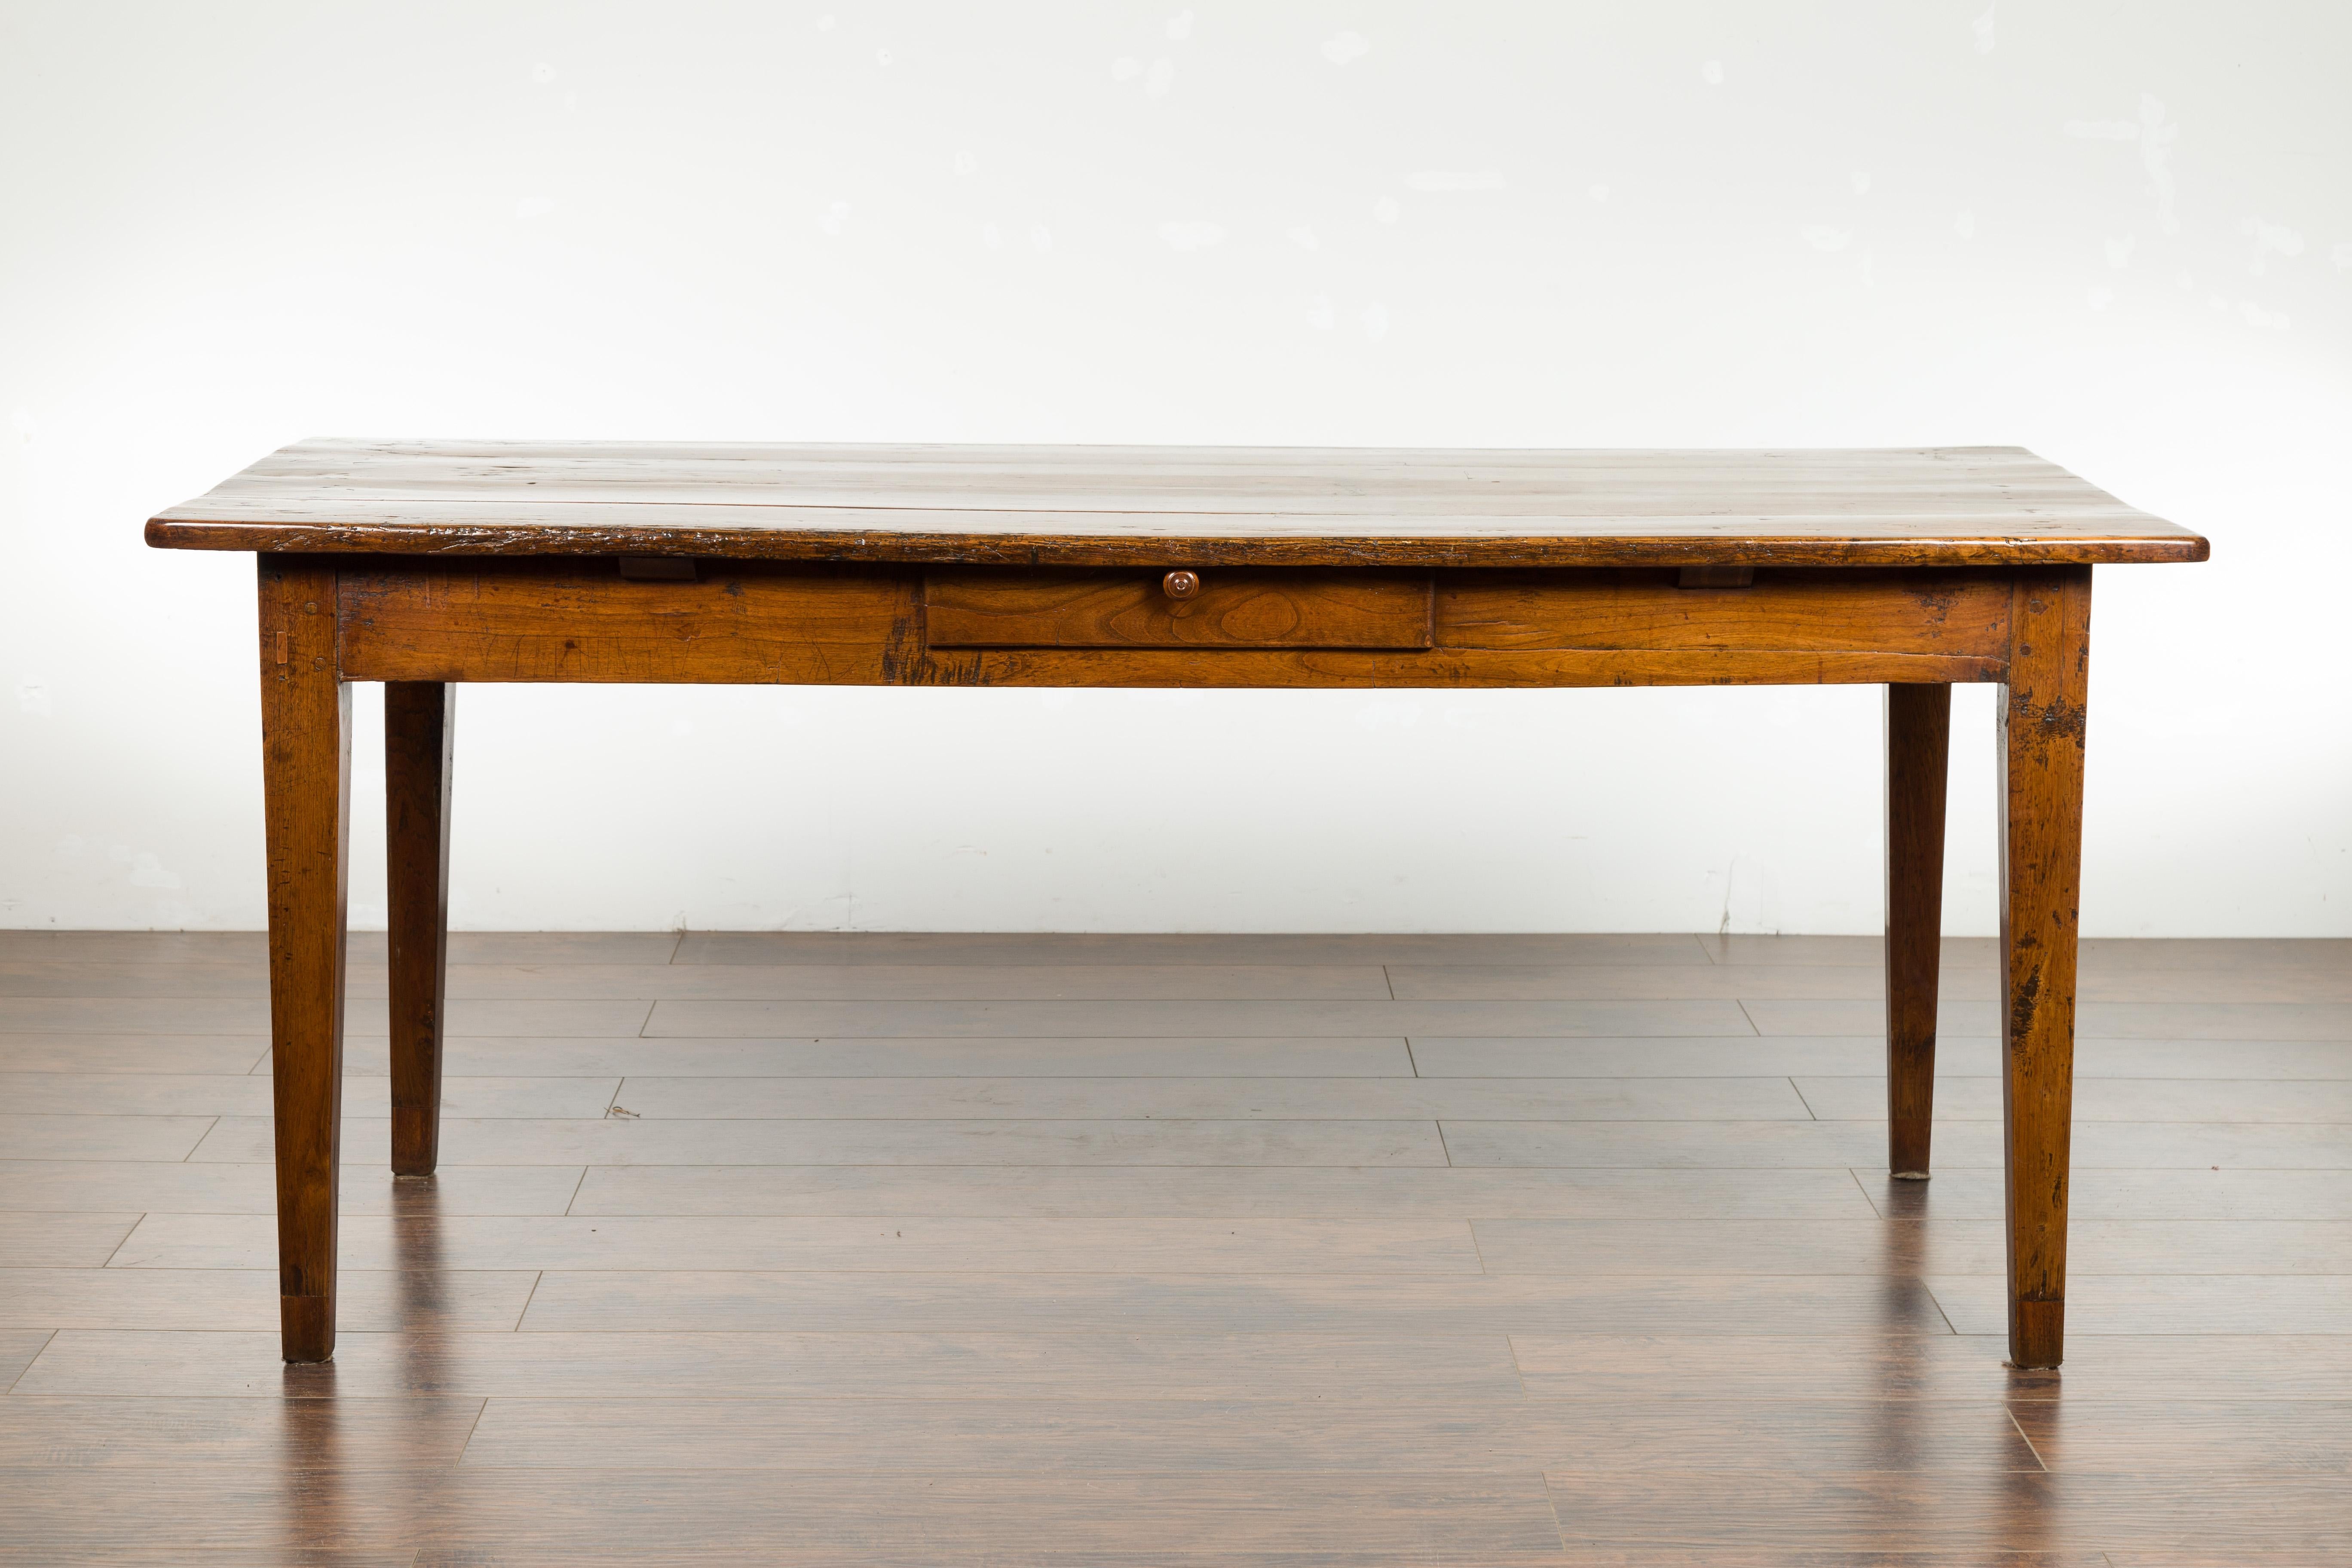 An English elm farm table from the late 19th century, with single drawer and tapered legs. Created in England during the third quarter of the 19th century, this elm farm table, which could be used as a desk as well, features a rectangular planked